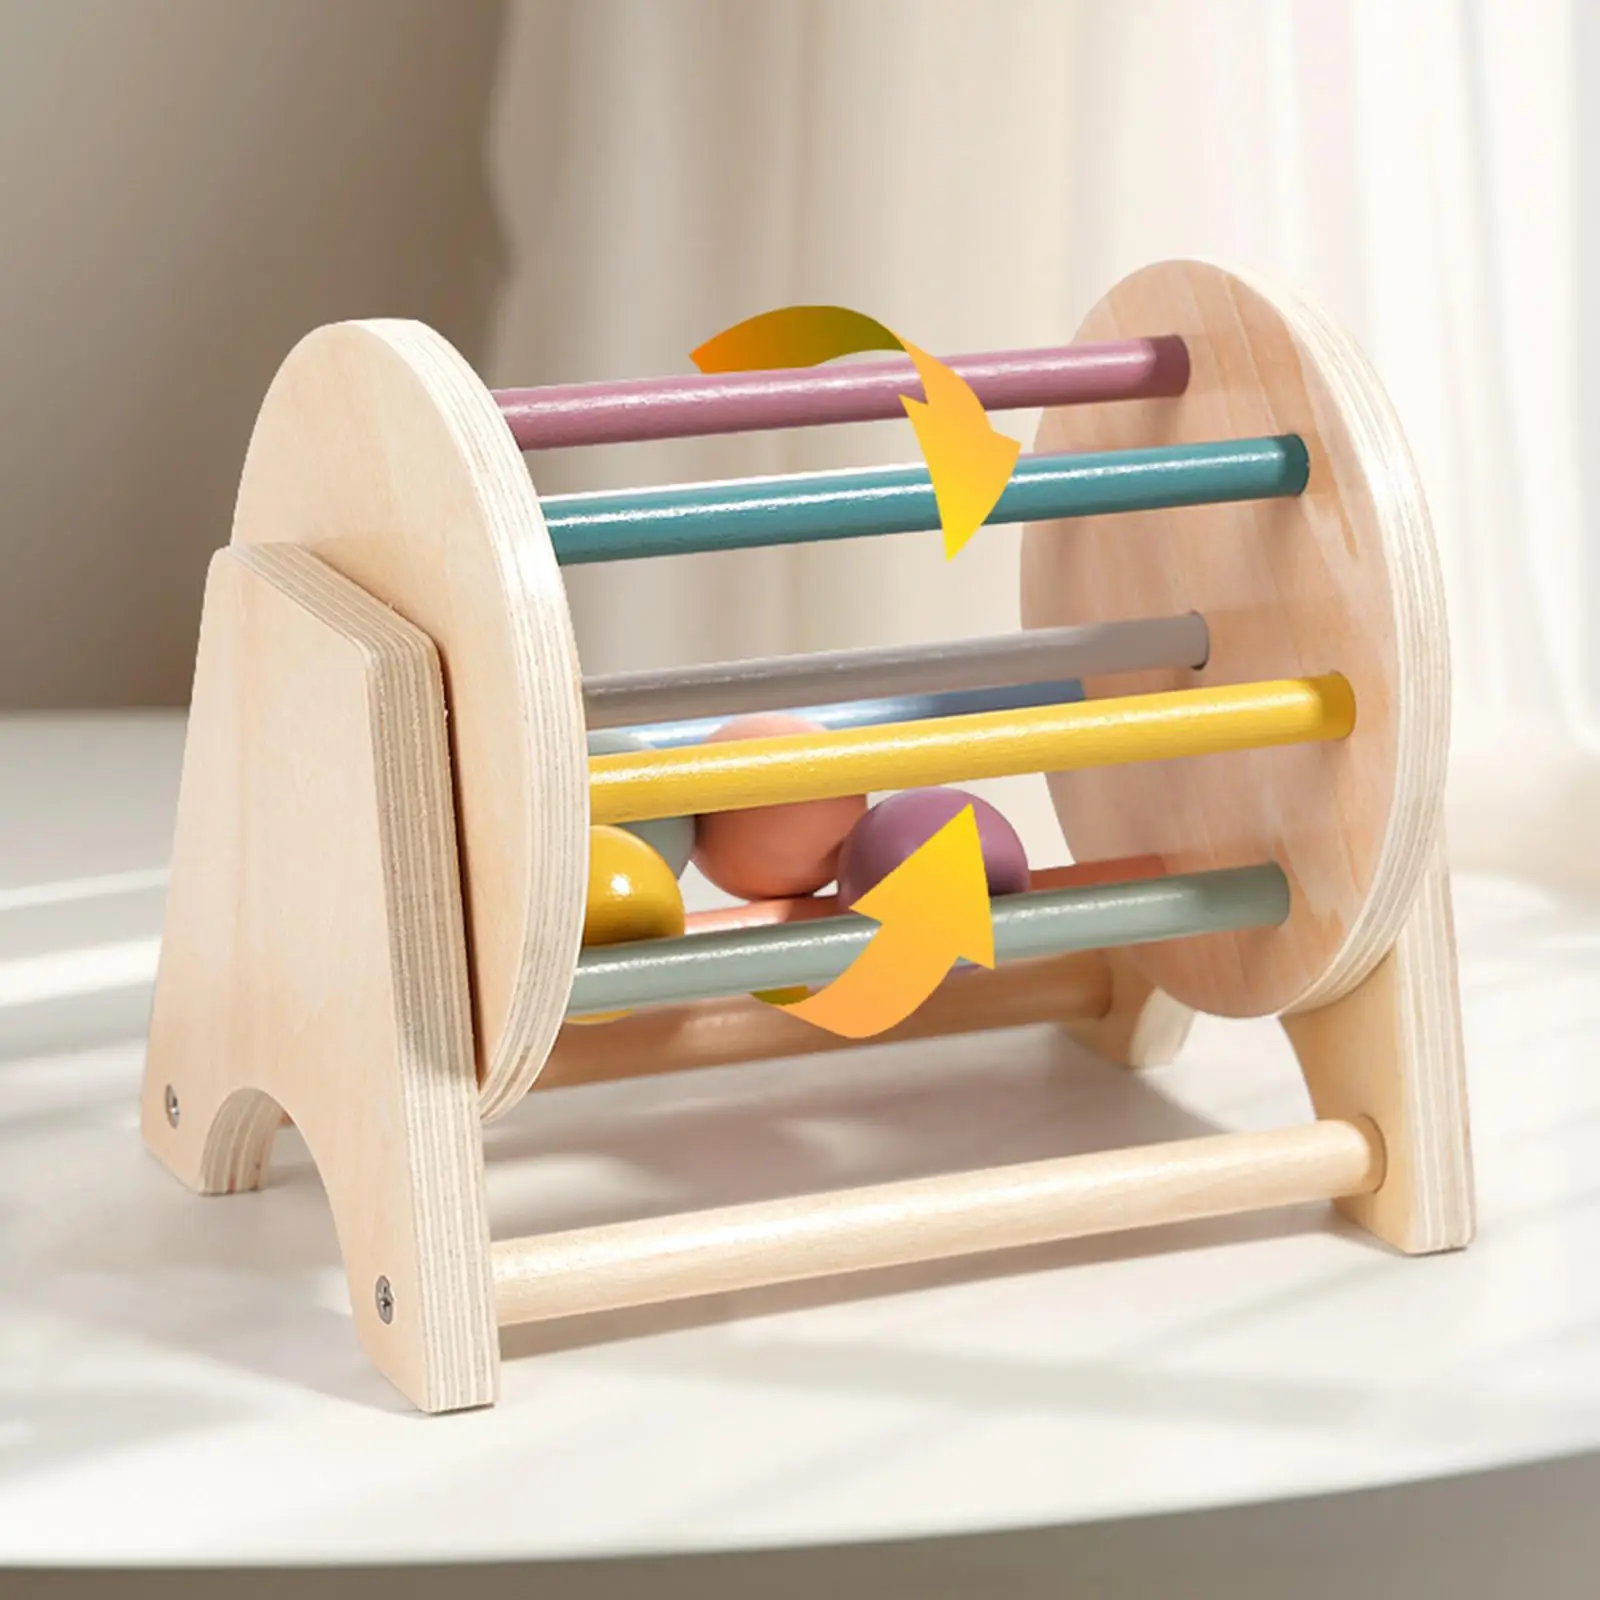 

Rolling Drum Toy Movement Wooden Toy Sensory Development Toy Montessori Rolling Drum for Kids Ages 6-12 Month Boys Girls Baby